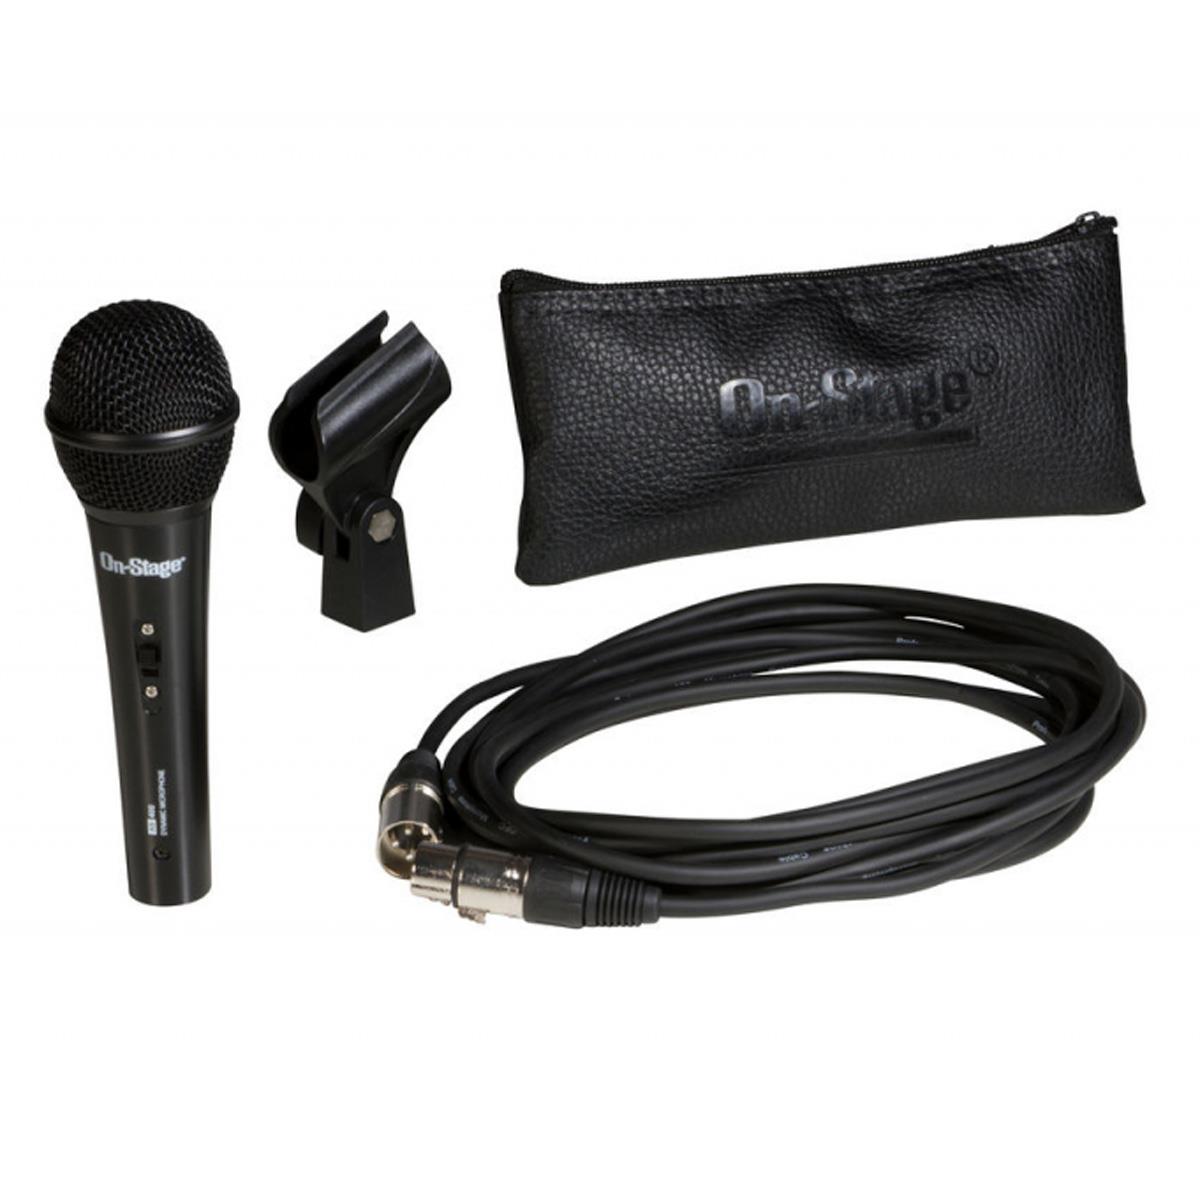 Image of On-Stage On Stage AS400V2 Hyper Cardioid Dynamic Handheld Microphone with On/Off Switch